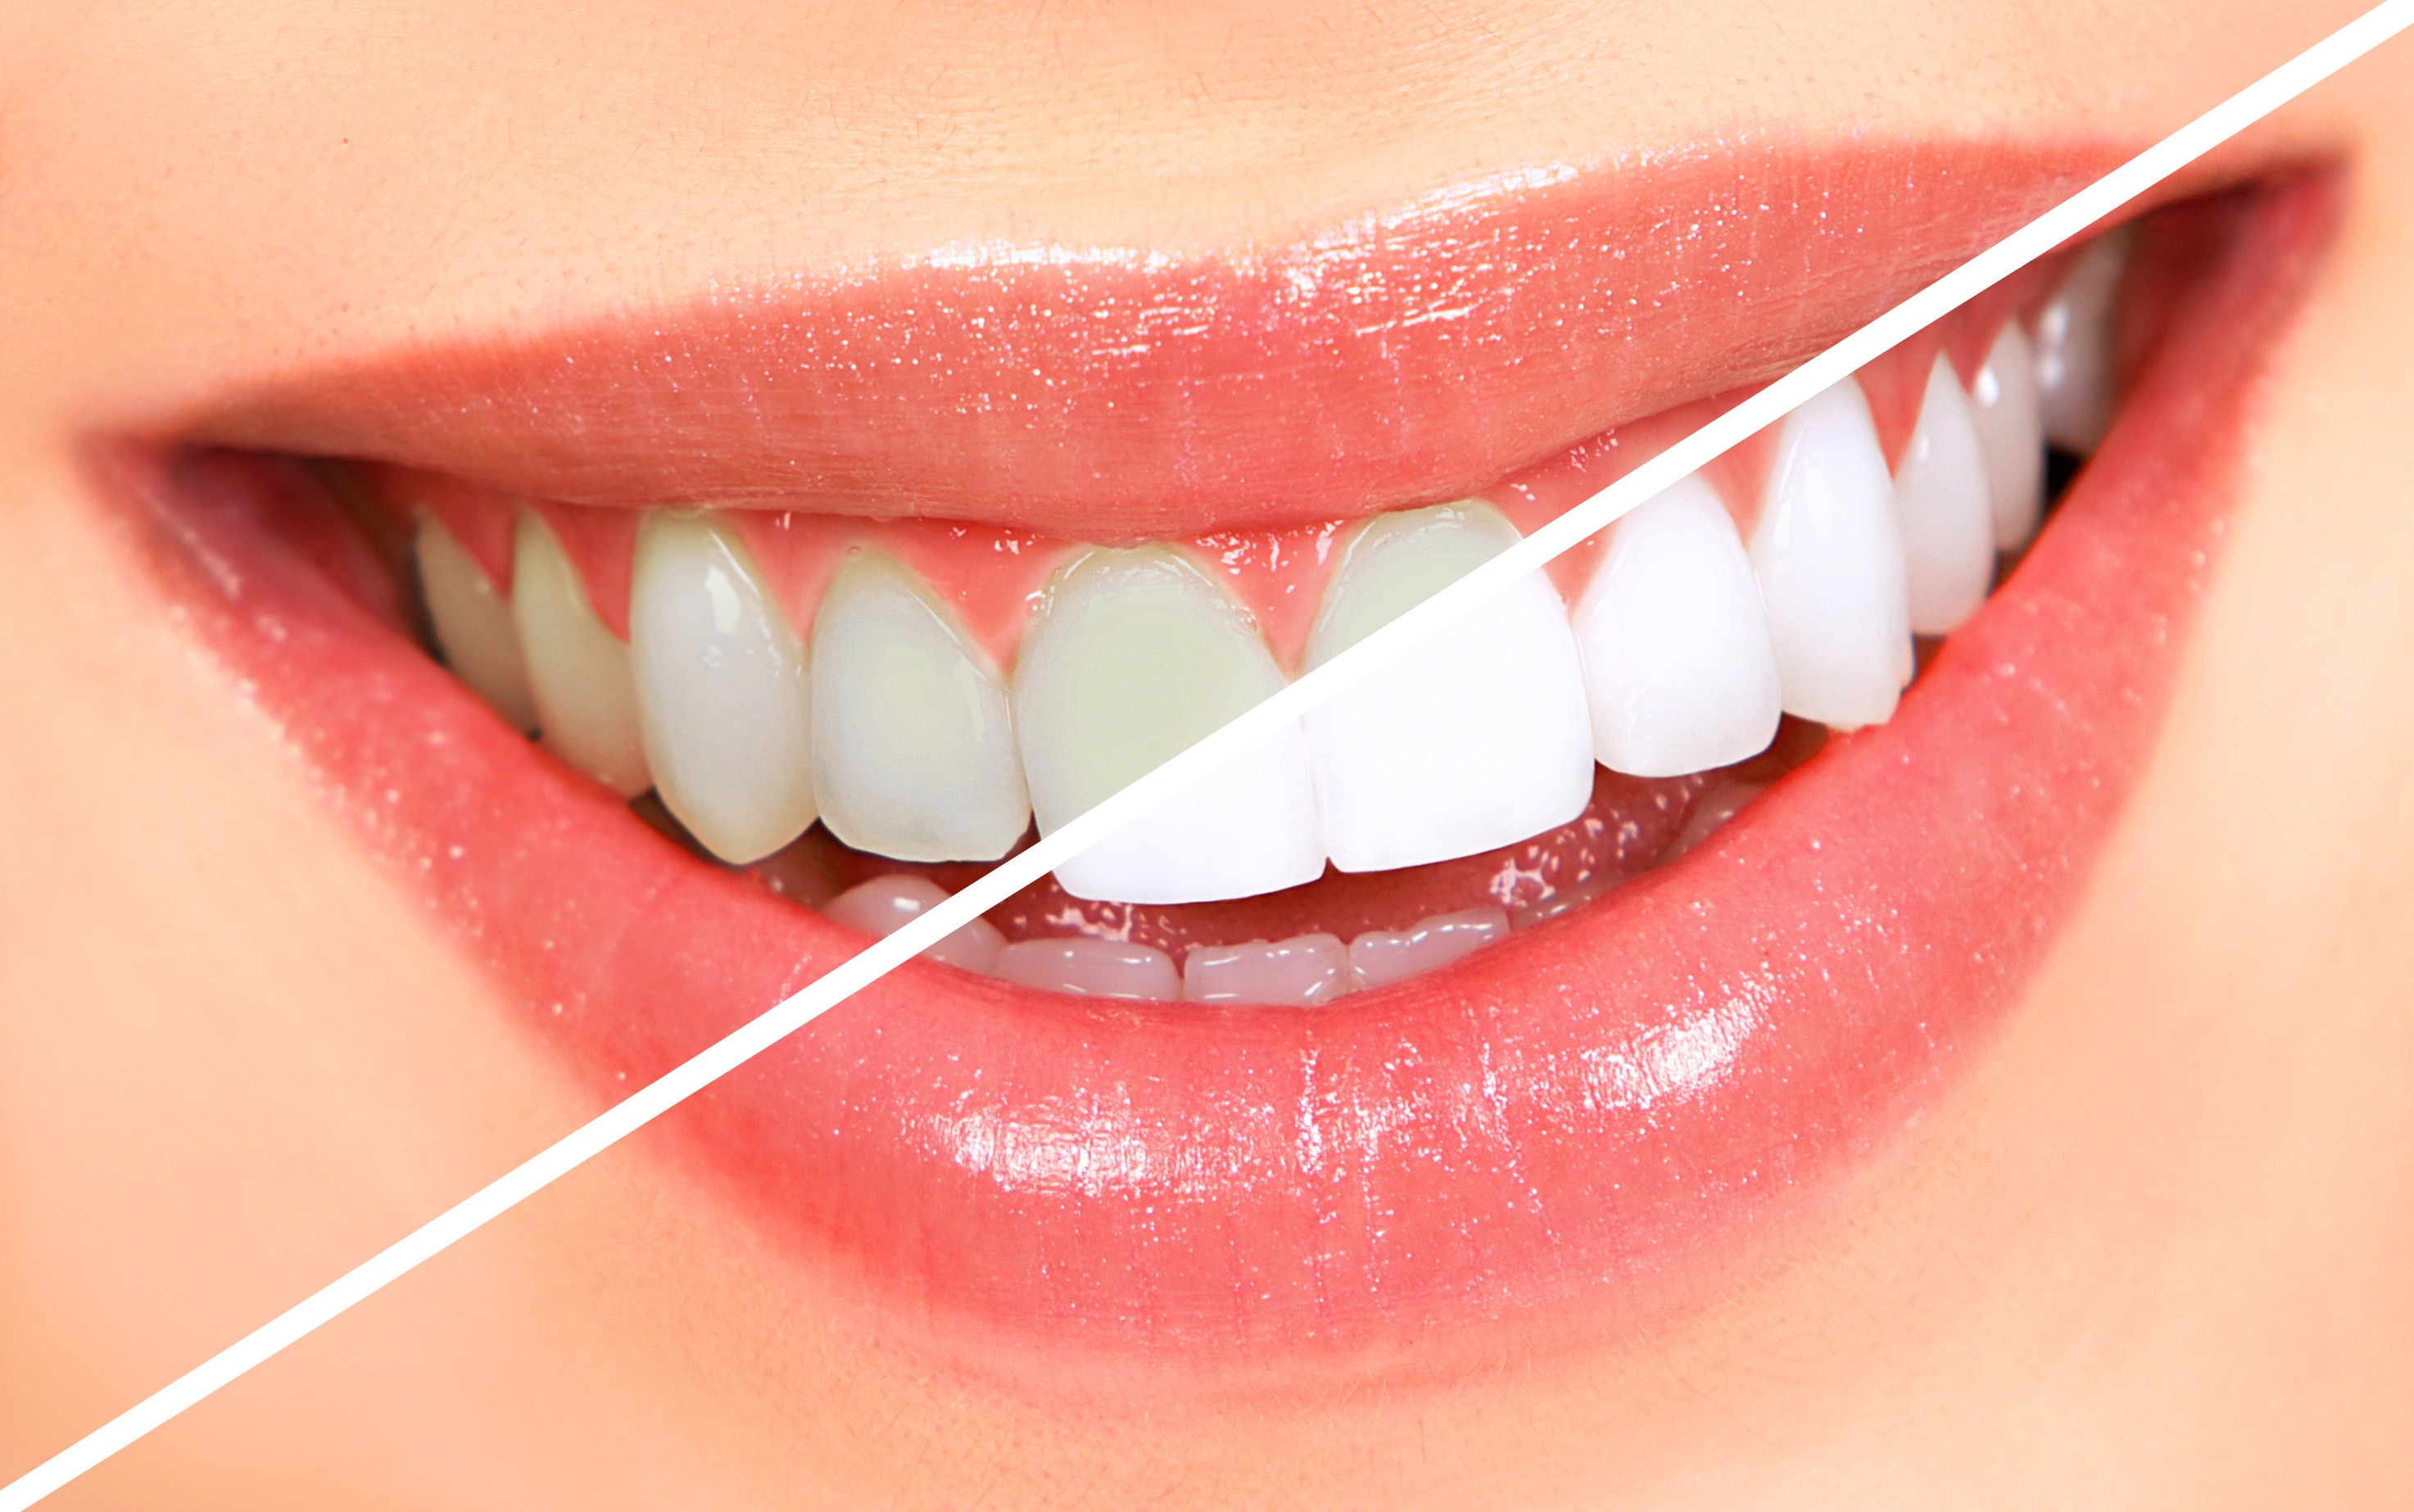 We are the best teeth whitening dentistry in Parramatta.